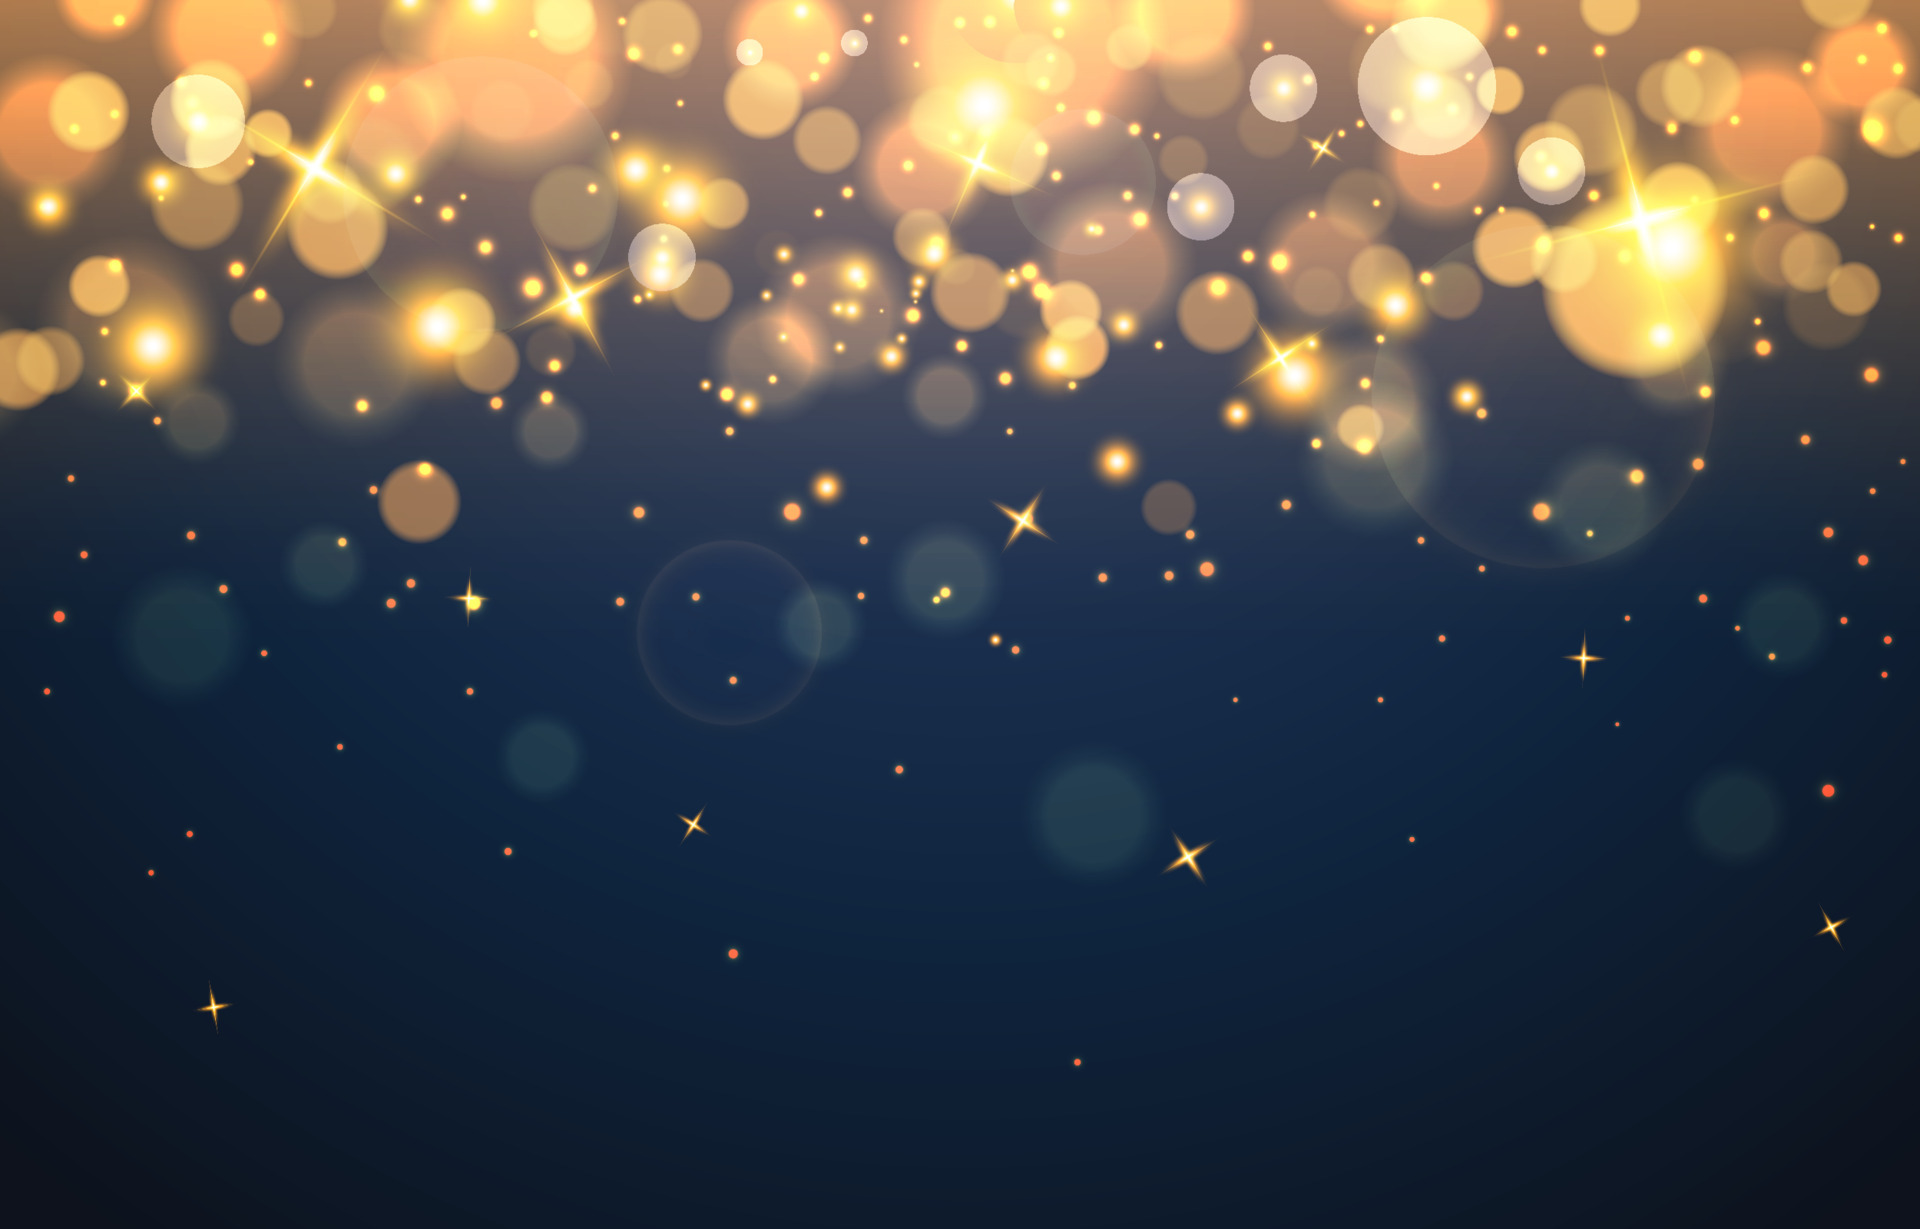 Blue Gold Background Images HD Pictures and Wallpaper For Free Download   Pngtree